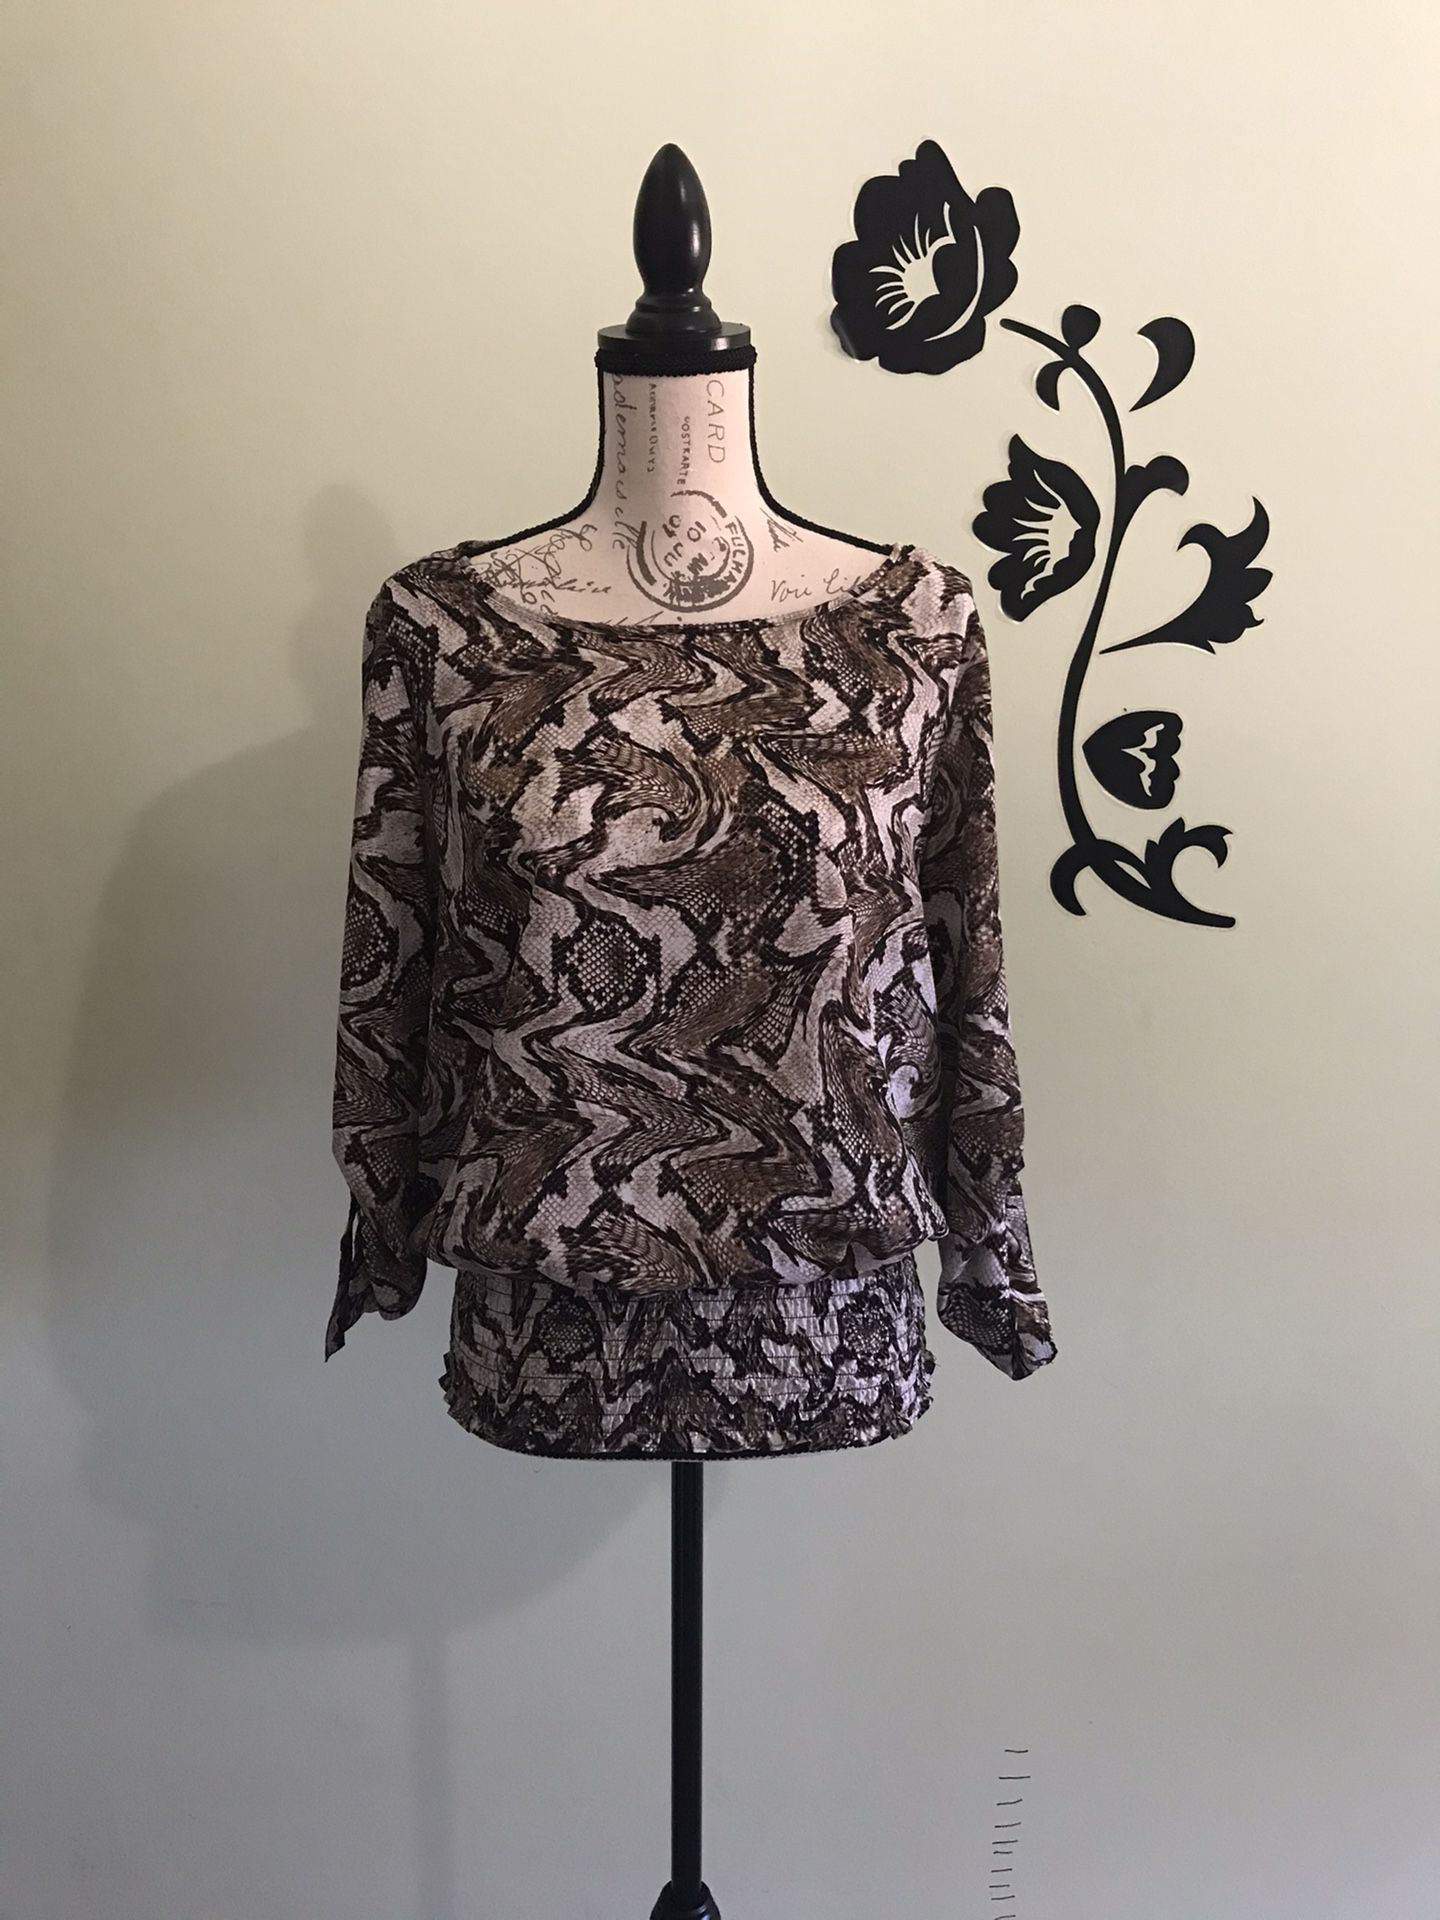 Michael Kors Women’s Top Size Large with Stretchy waist, Snake print and adjustable sleeves beautiful stylish blouse!